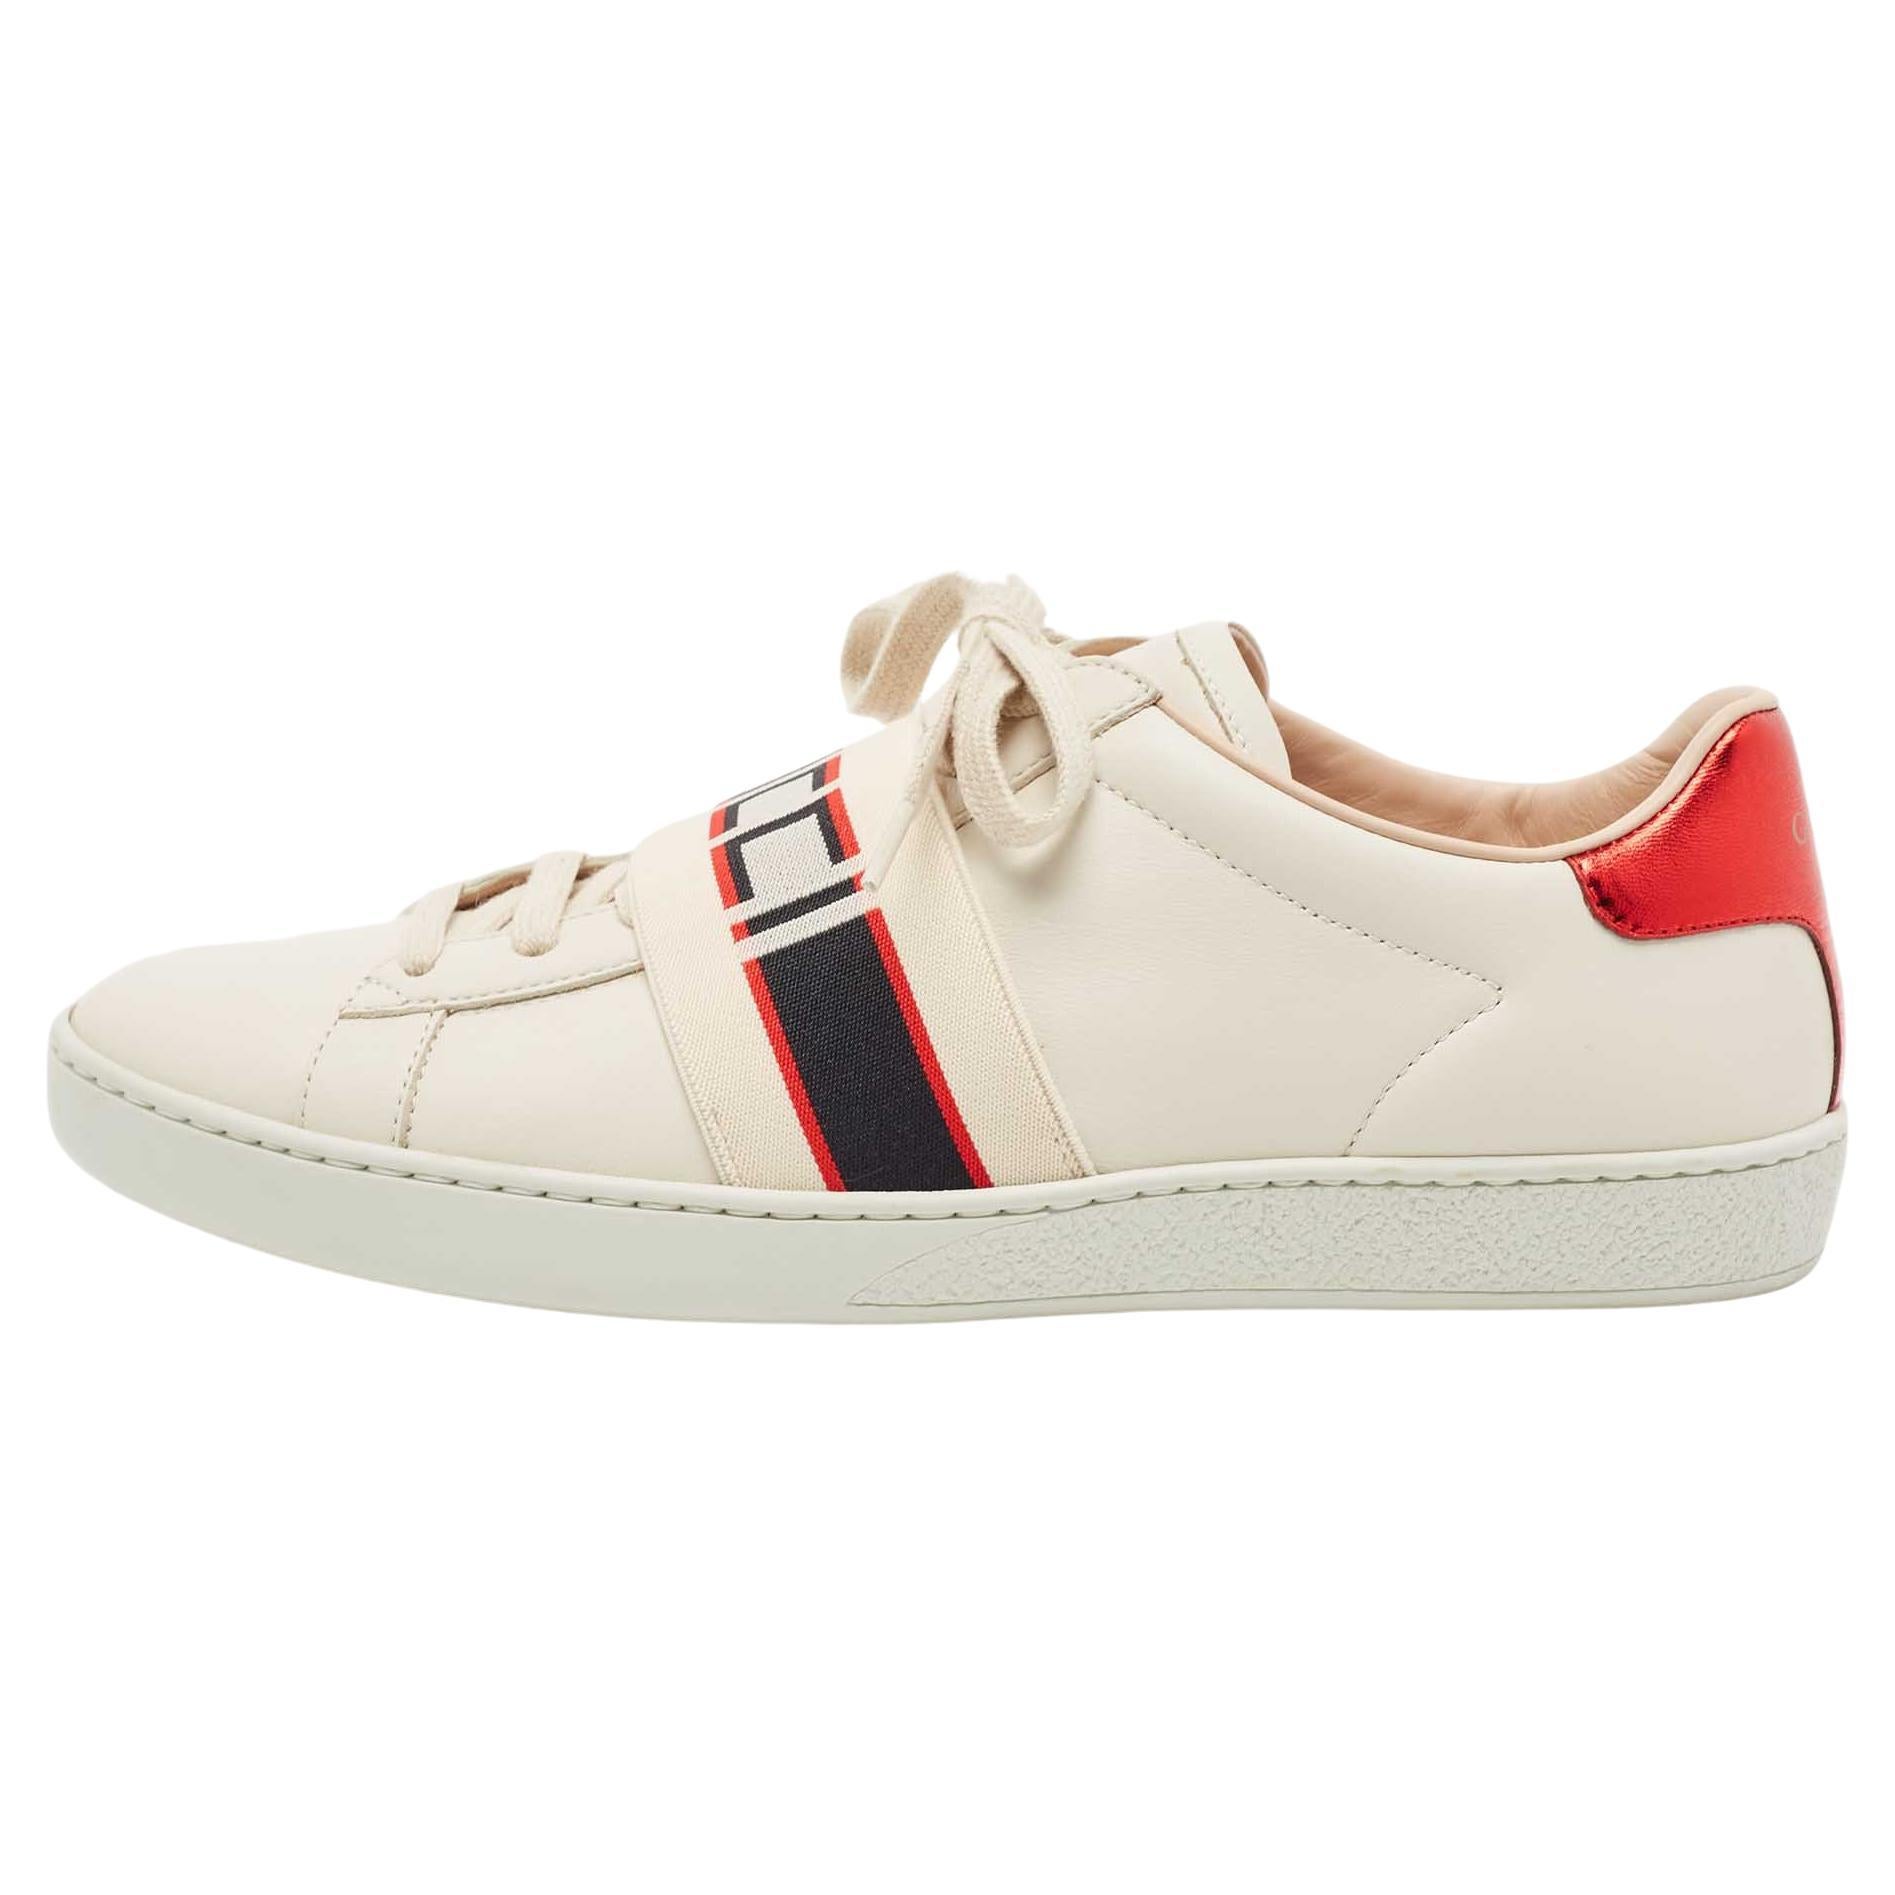 Gucci Cream Leather Logo Elastic Band Ace Sneakers Size 39 For Sale